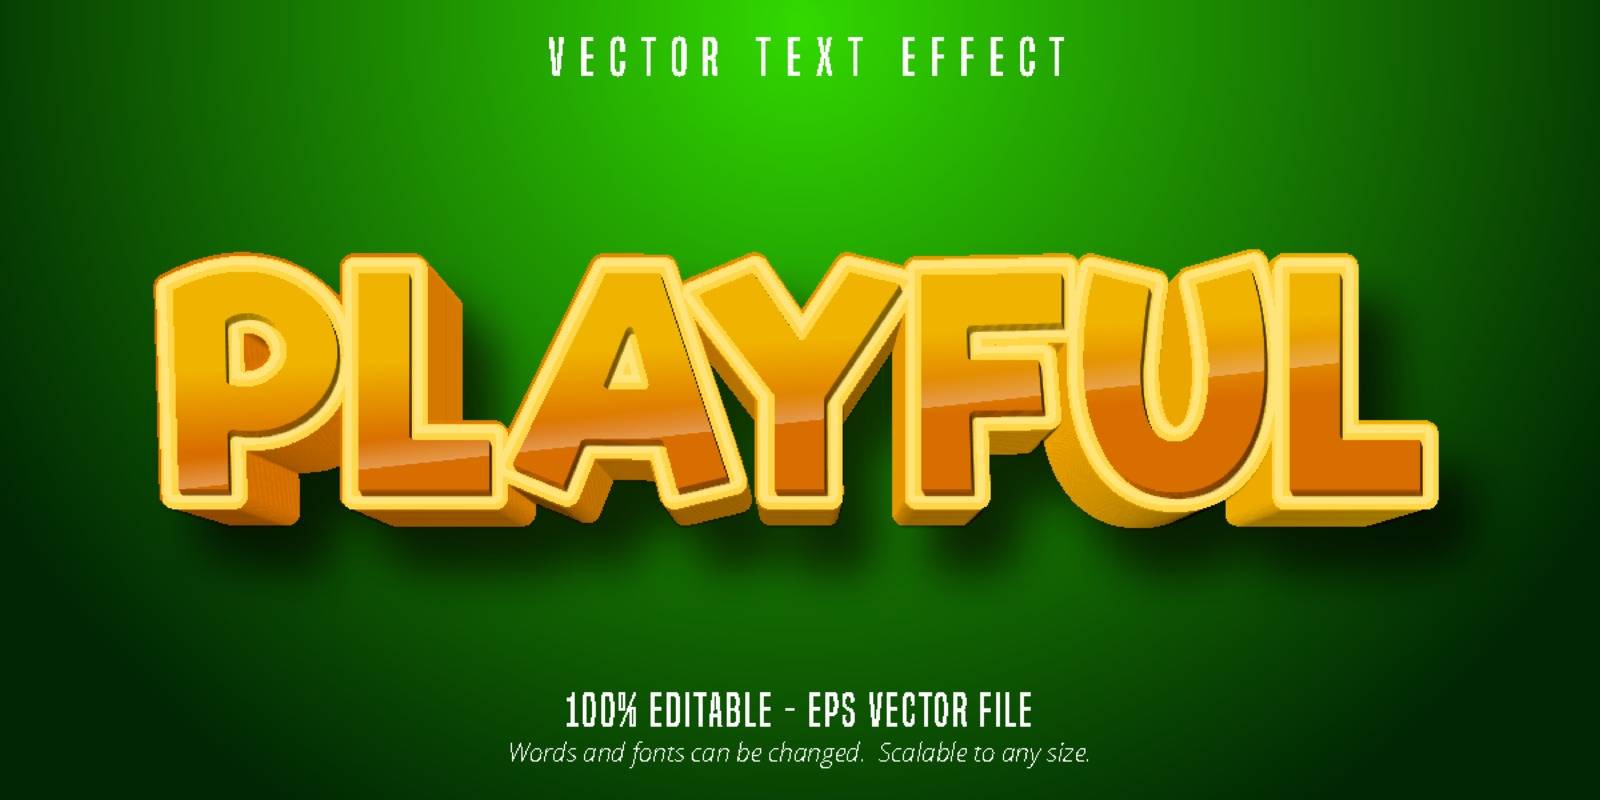 Playful text, comic style editable text effect by mustafabeksen